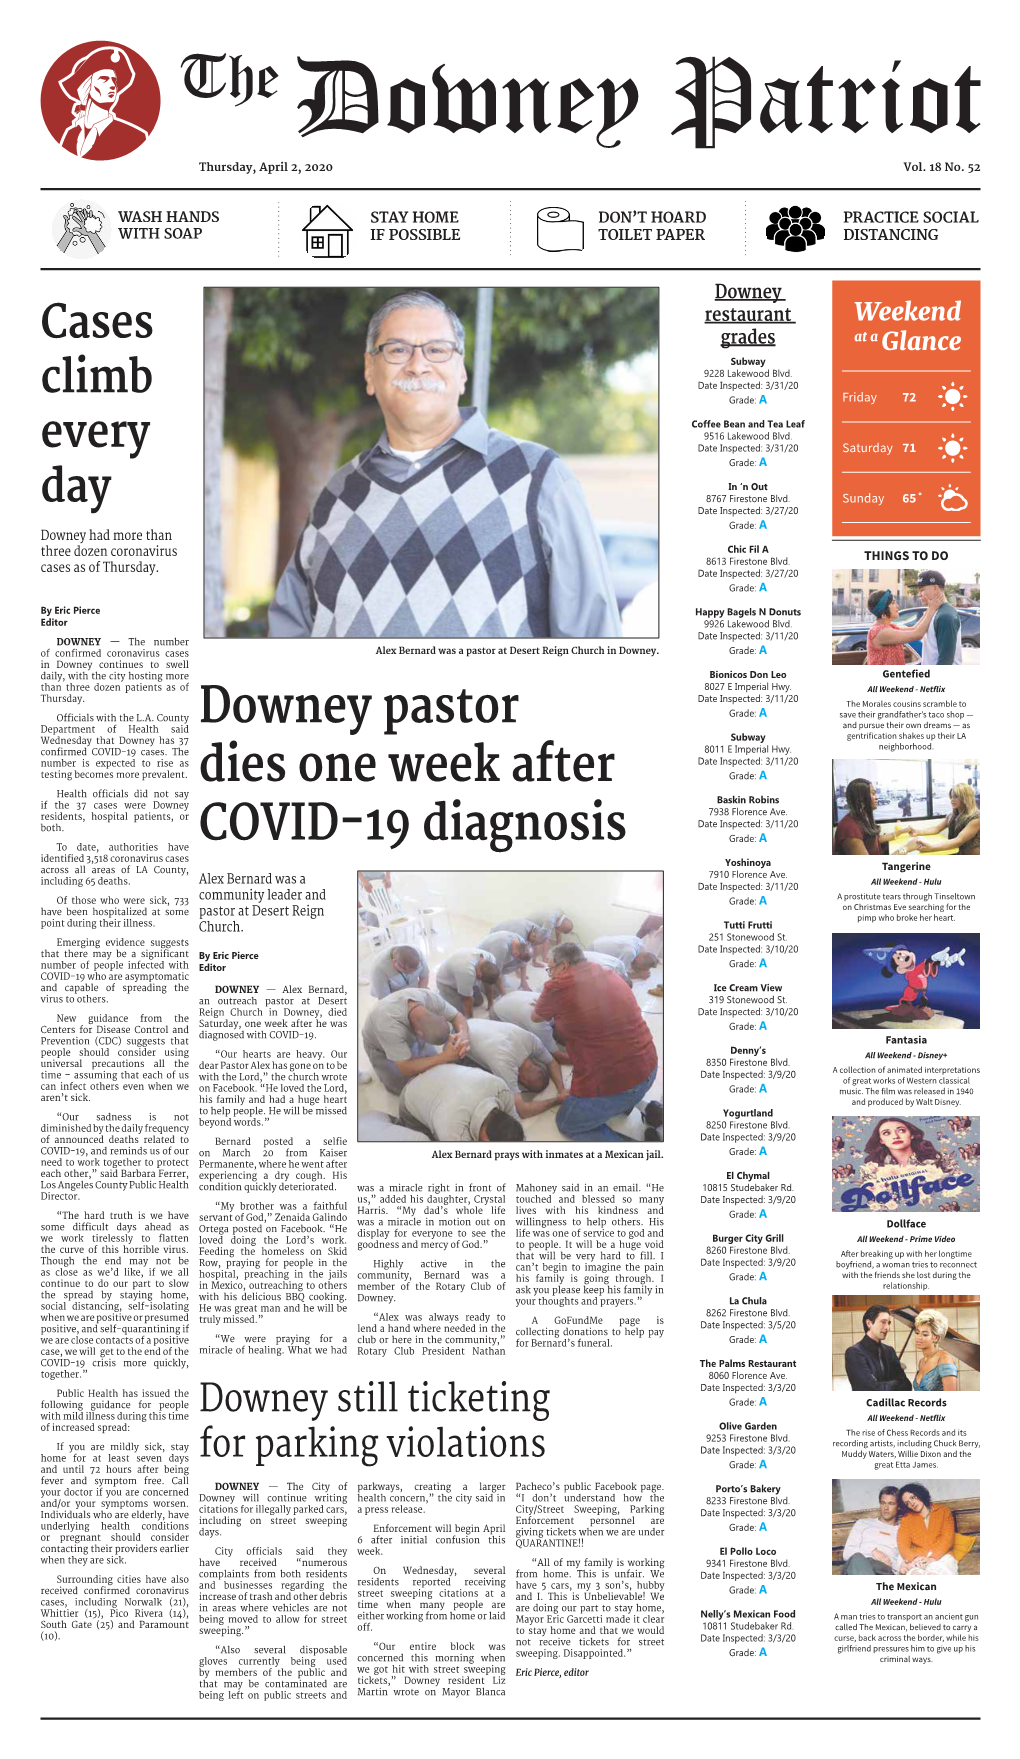 Downey Pastor Dies One Week After COVID-19 Diagnosis